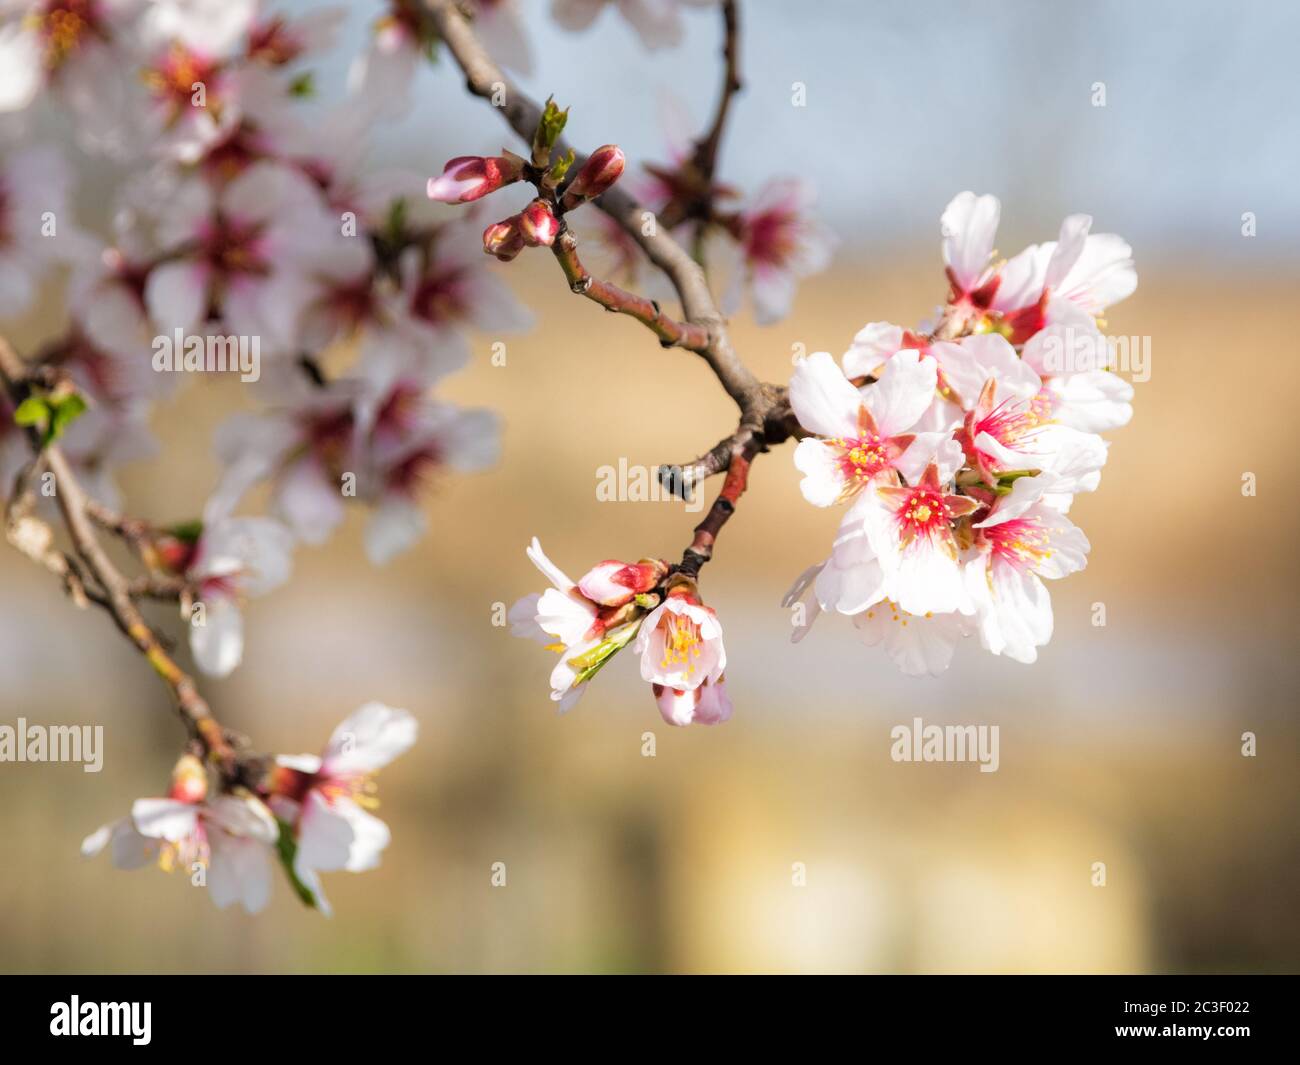 Almond blossom on tree in spring Stock Photo